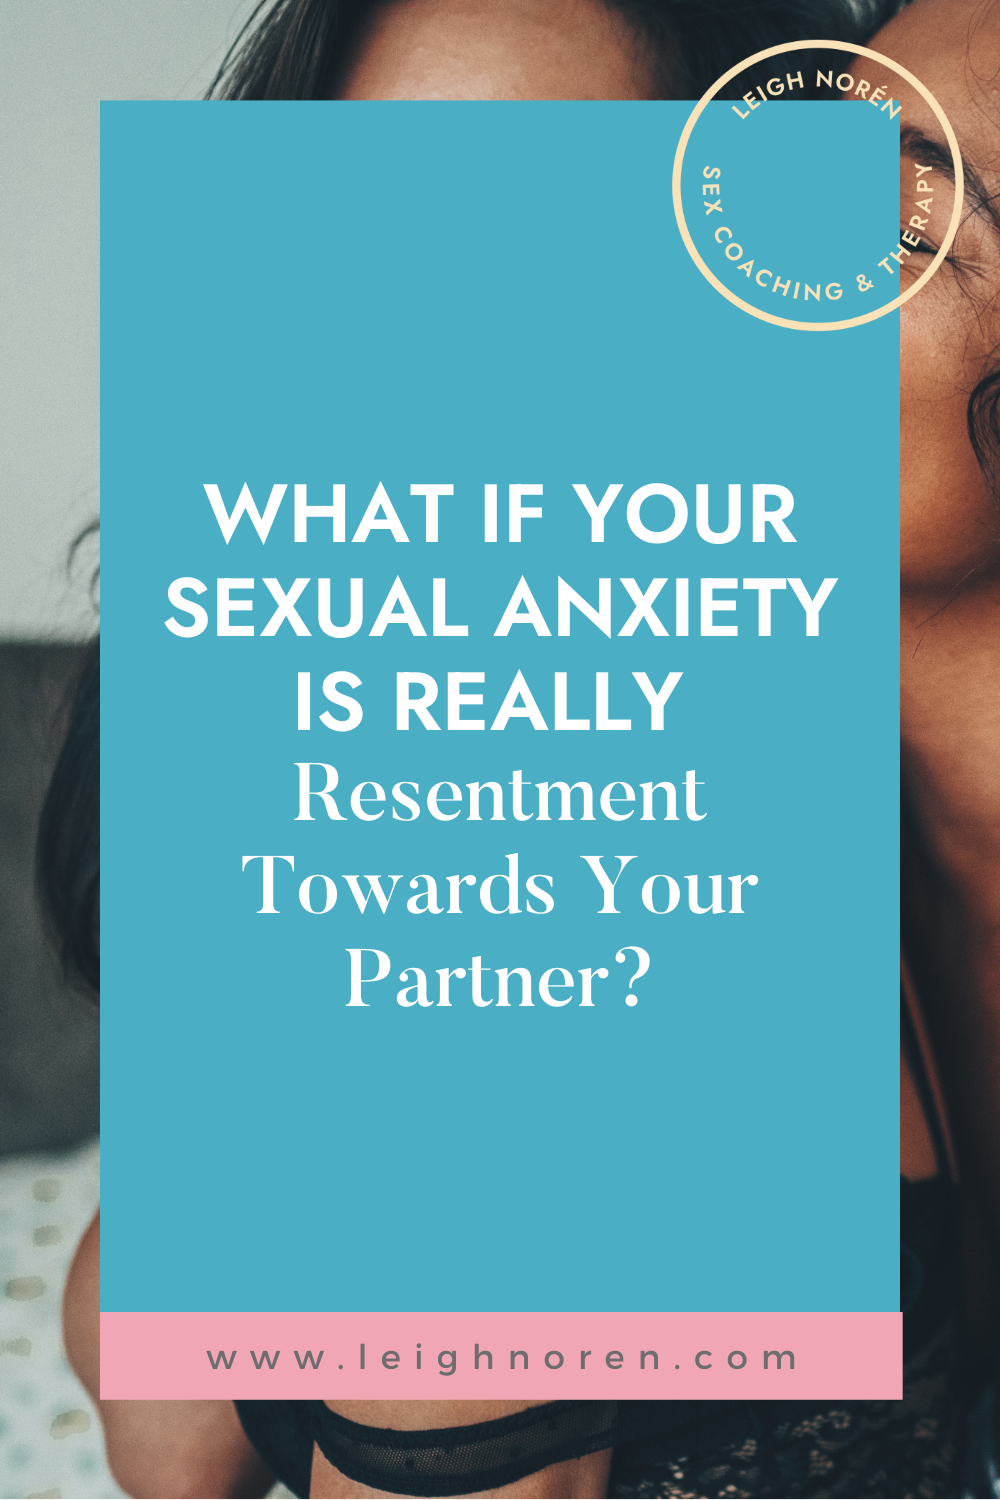 Resentment Towards Your Partner?